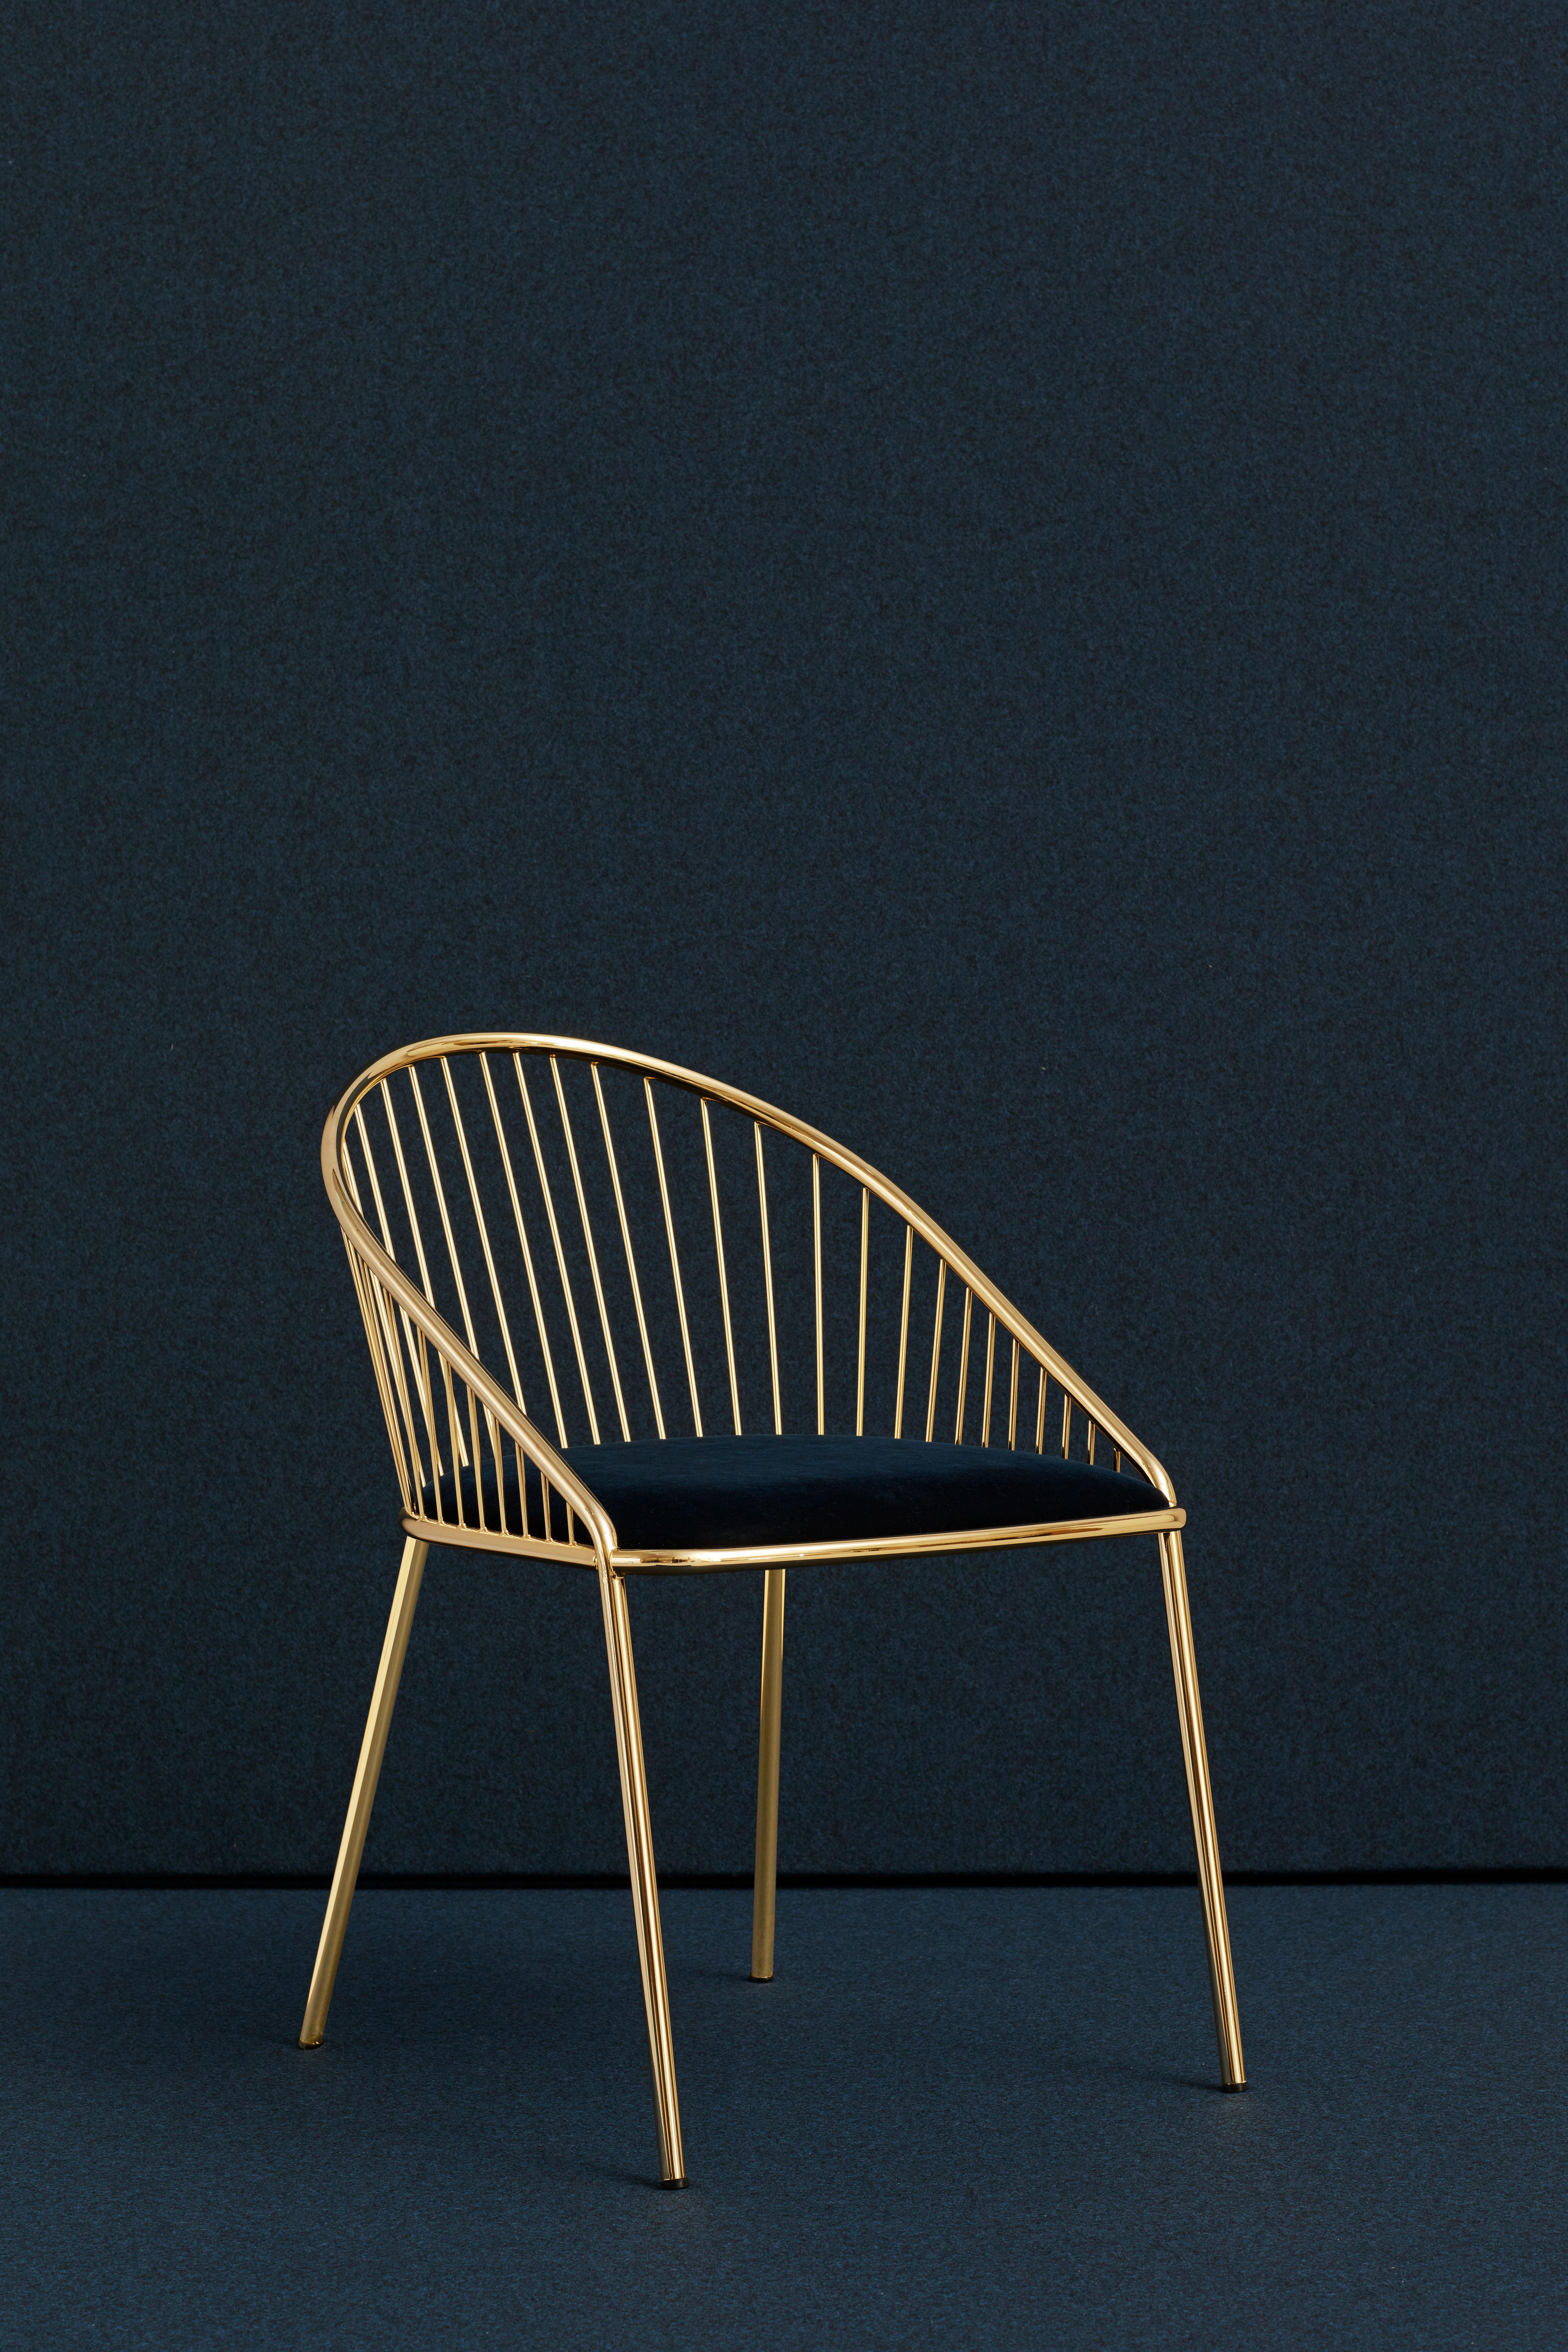 Agora Gold Chair by Pepe Albargues
Dimensions:
Chair 
Height 79, seat 46, depth 64, width 54
Materials:
Iron strucutre and particles board.
Seat stuffed with polyurethane CMHR40-30.
Lacquered iron legs.

About 
Agora Collection, black and gold chair